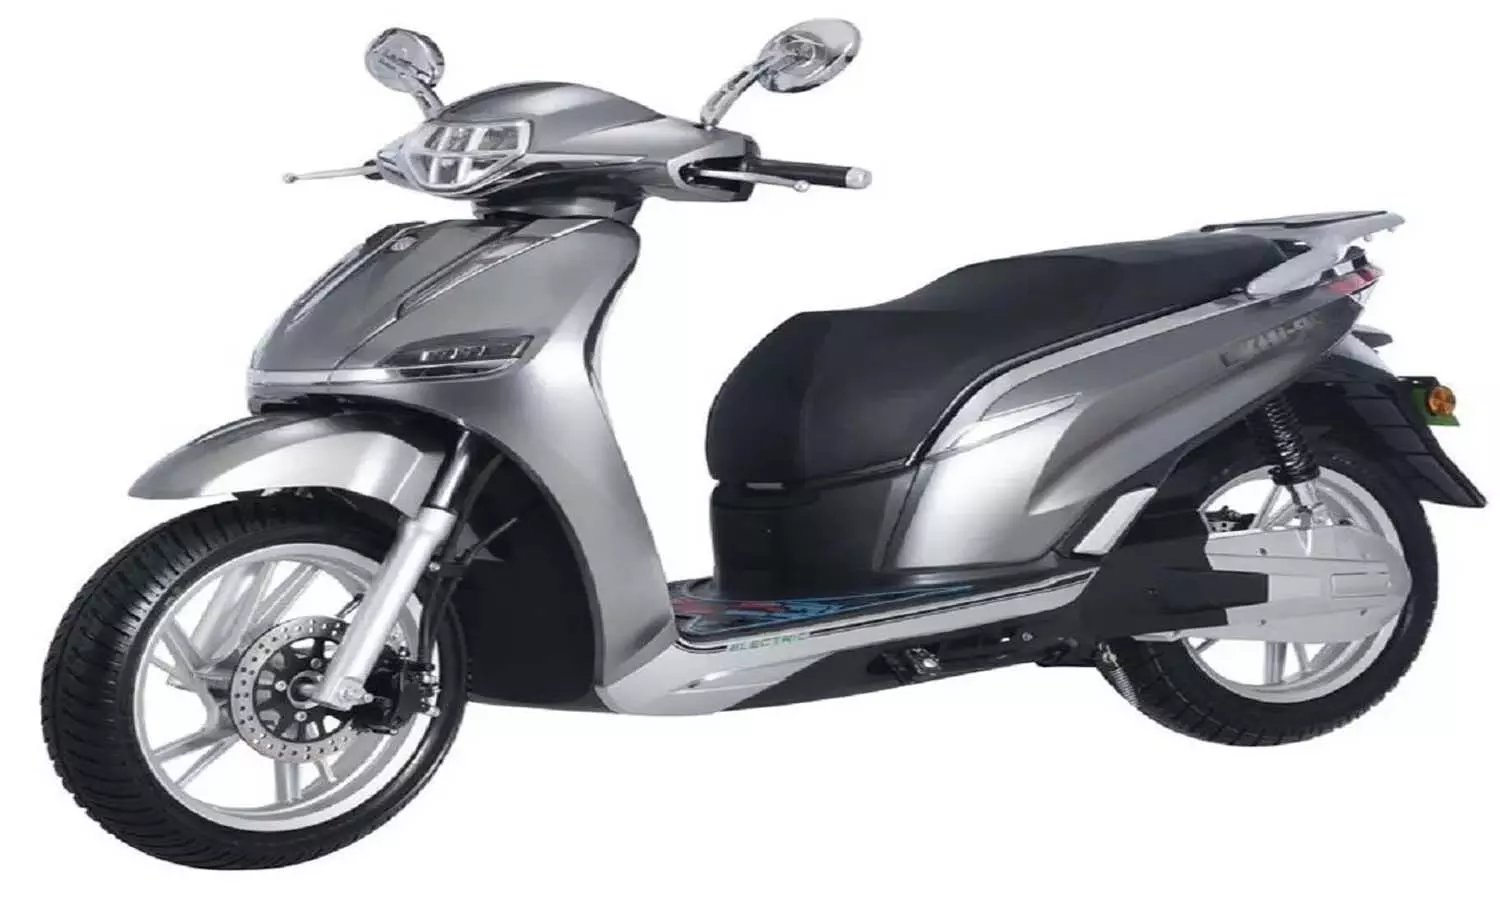 Okinawa companys OKHI-90 runs for 160 km on a single charge, know the amazing features and price